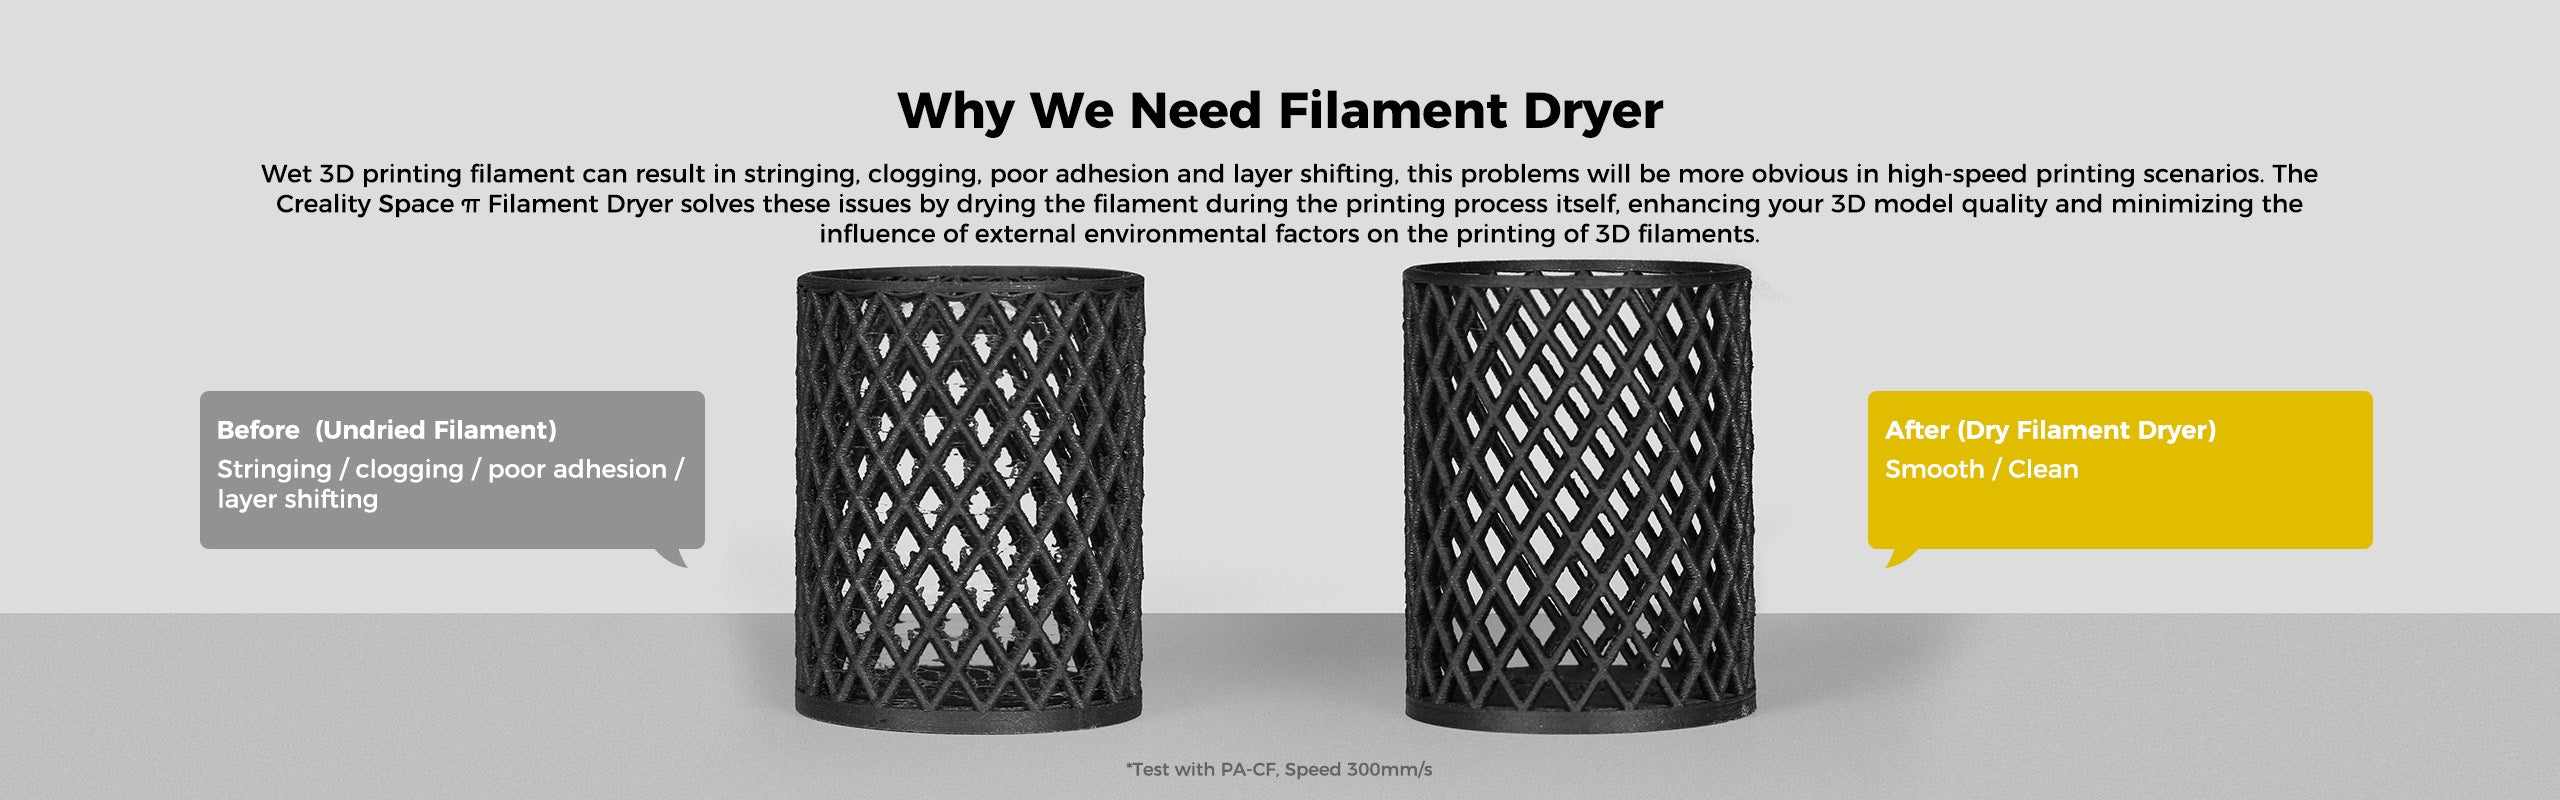 Why We Need space pi Filament Dryer